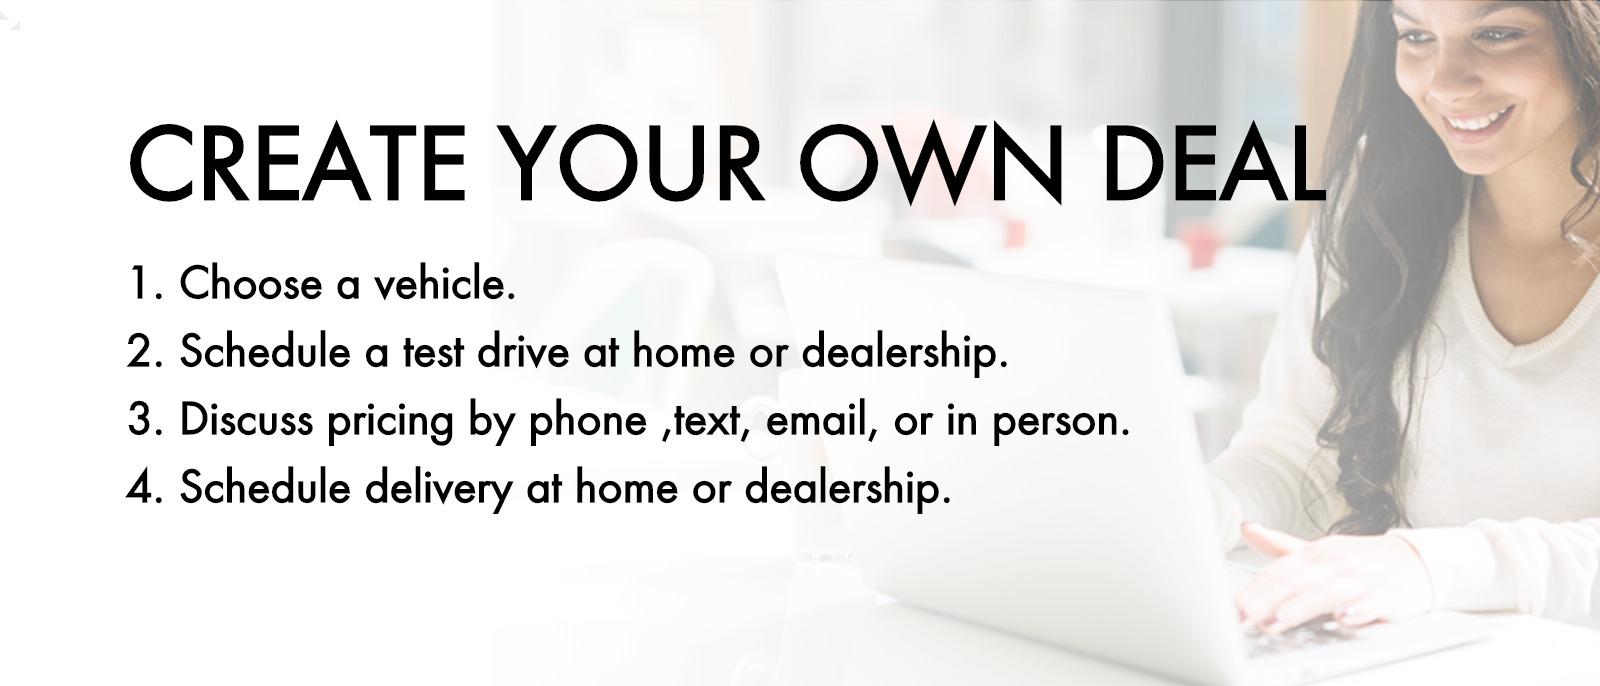 Create your own deal , 1. Choose a vehicle 2. Schedule a test drive at home or dealership 3.Discuss pricing by phone ,text, email, or in person 4.schedule delivery at home or dealership